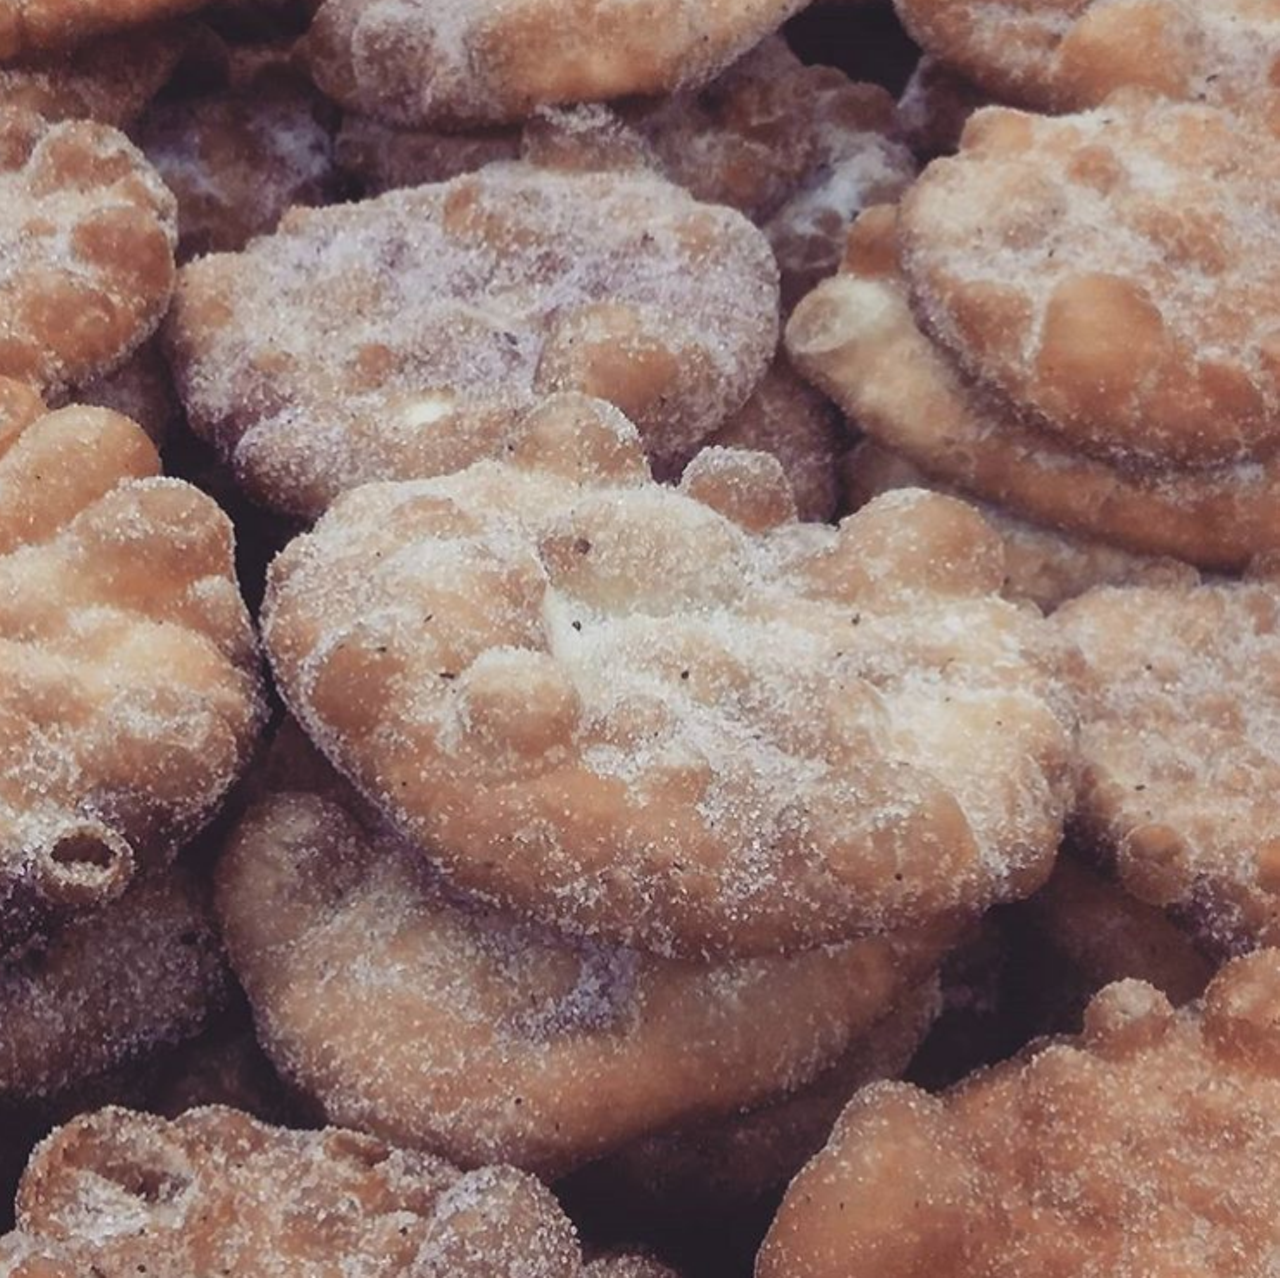 Los Cocos Bakery
3309 West Ave, (210) 349-3373, facebook.com/LosCocosBakery
You’ll find all the typical pan dulce treats, plus these super sugary buñuelos that will surely hit the spot.
Photo via Instagram / loscocosbakery